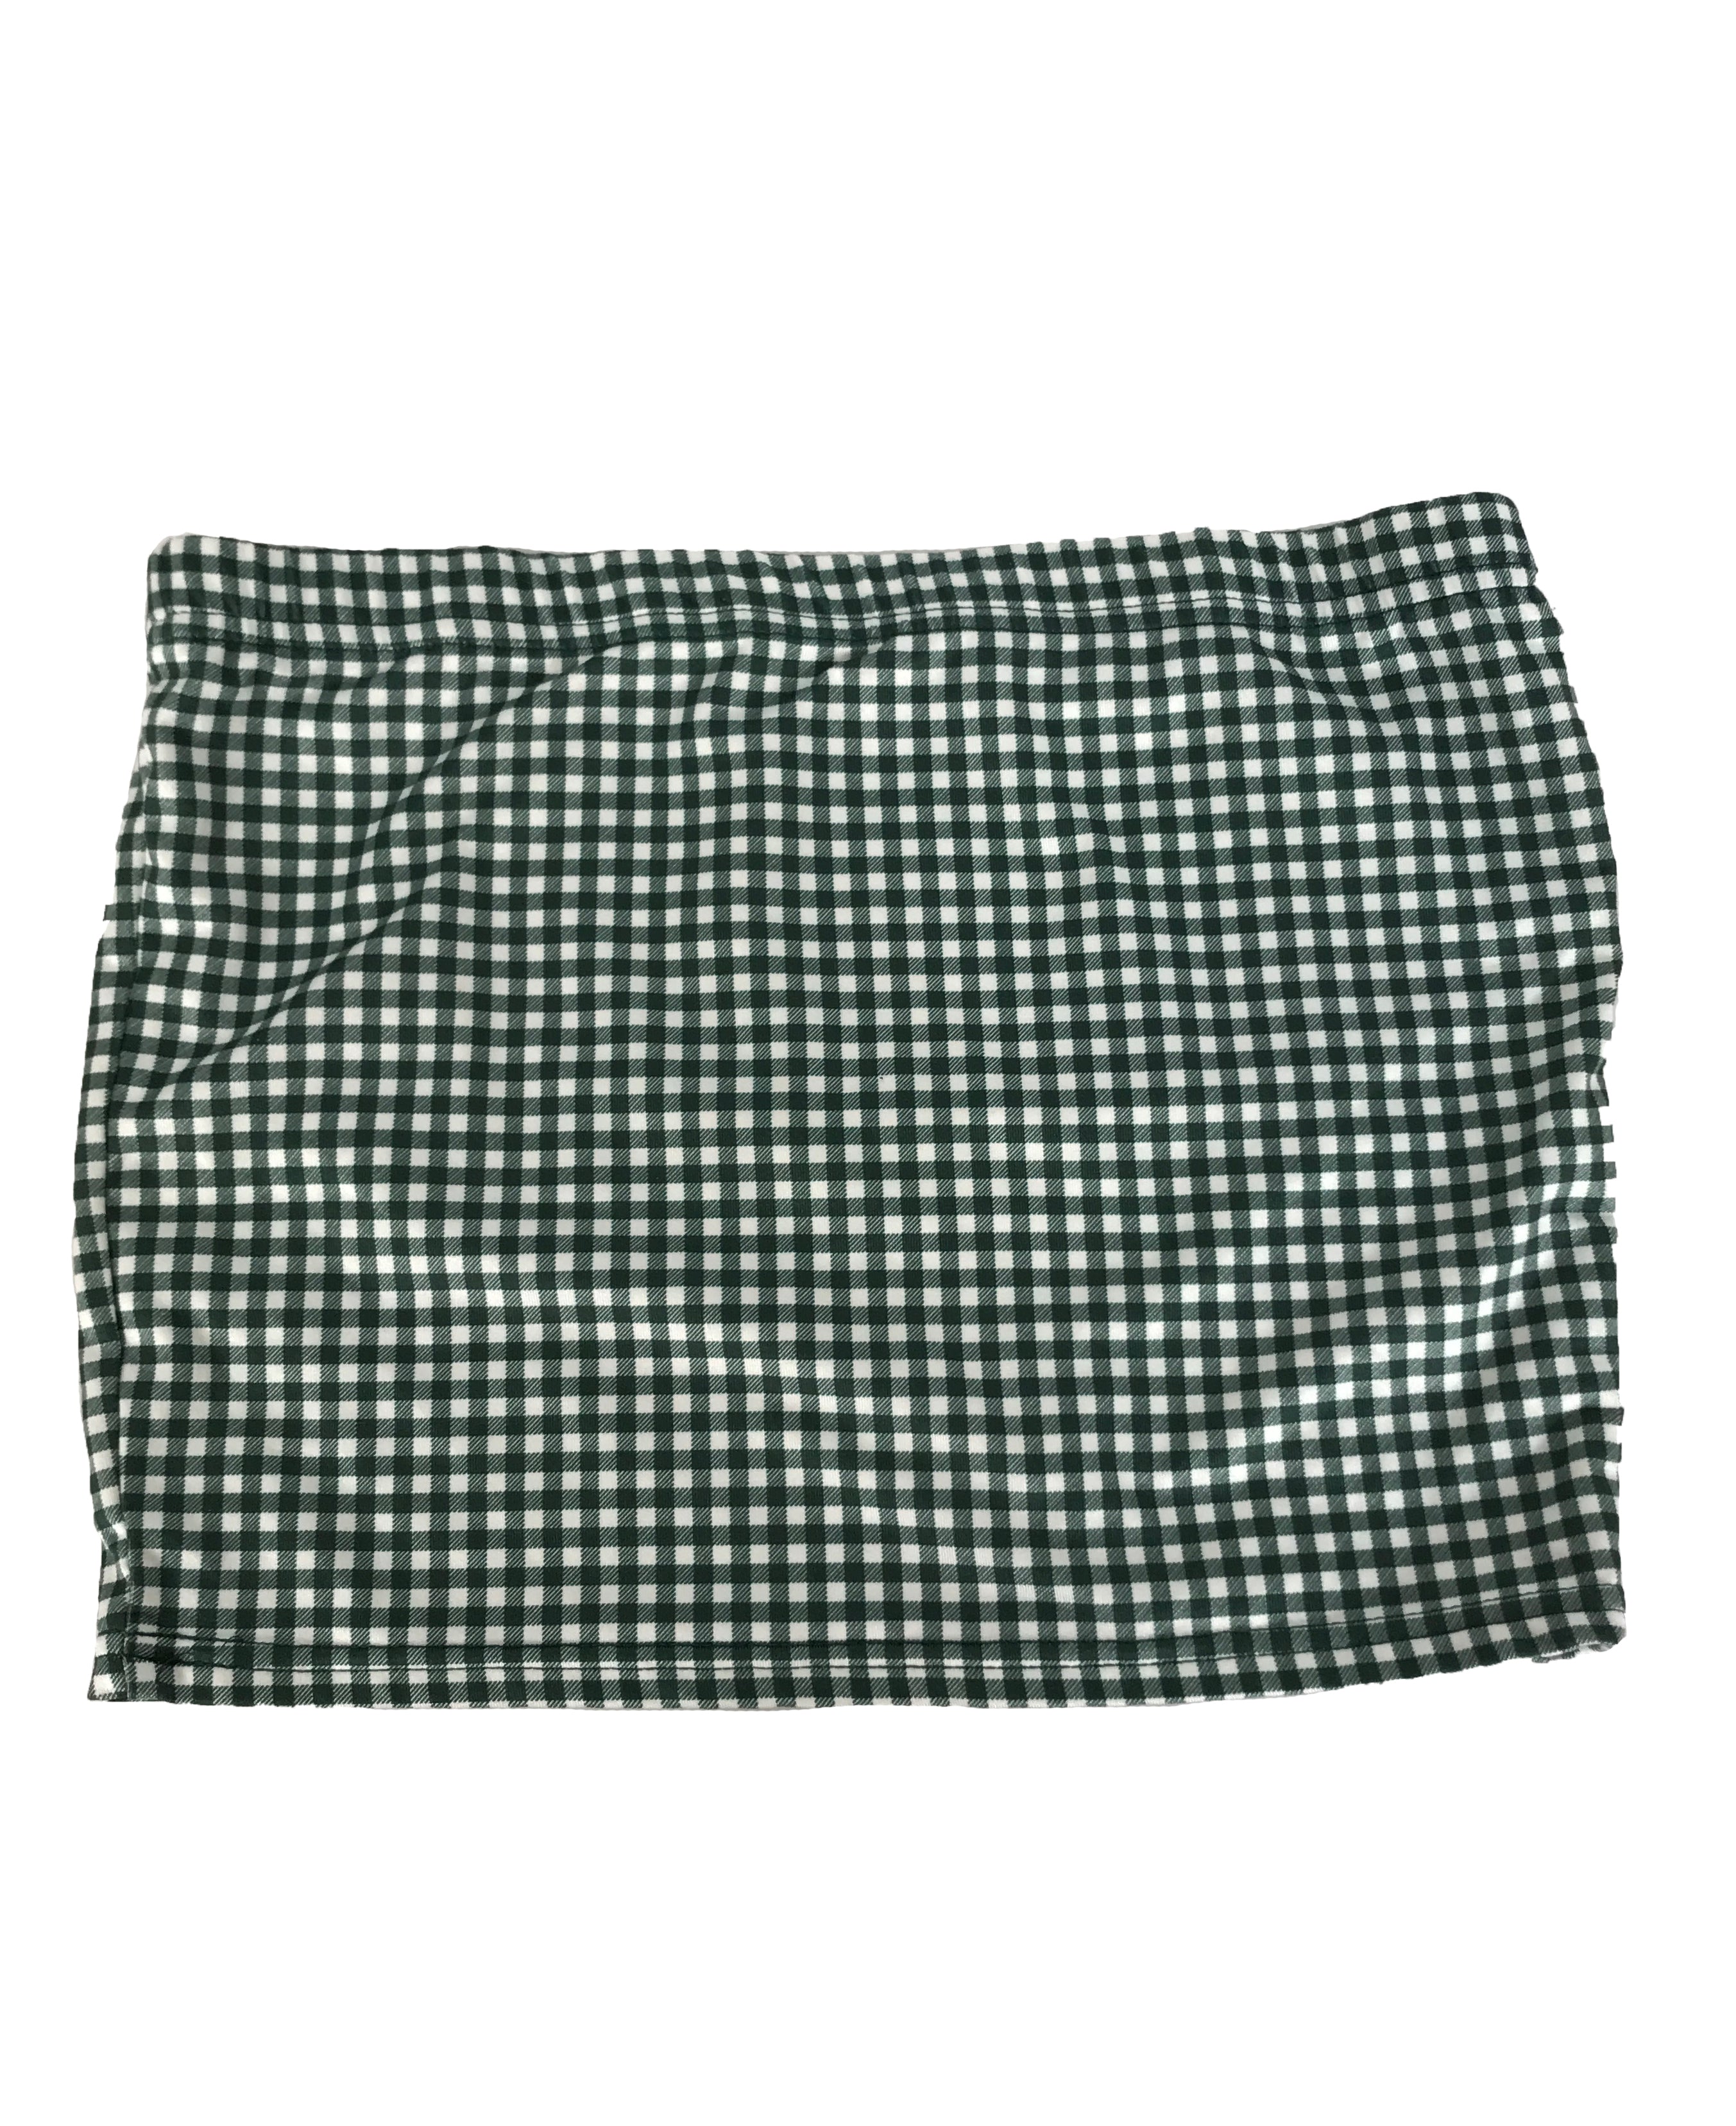 Michigan State Gingham Patterned Tube Top Women's Size M